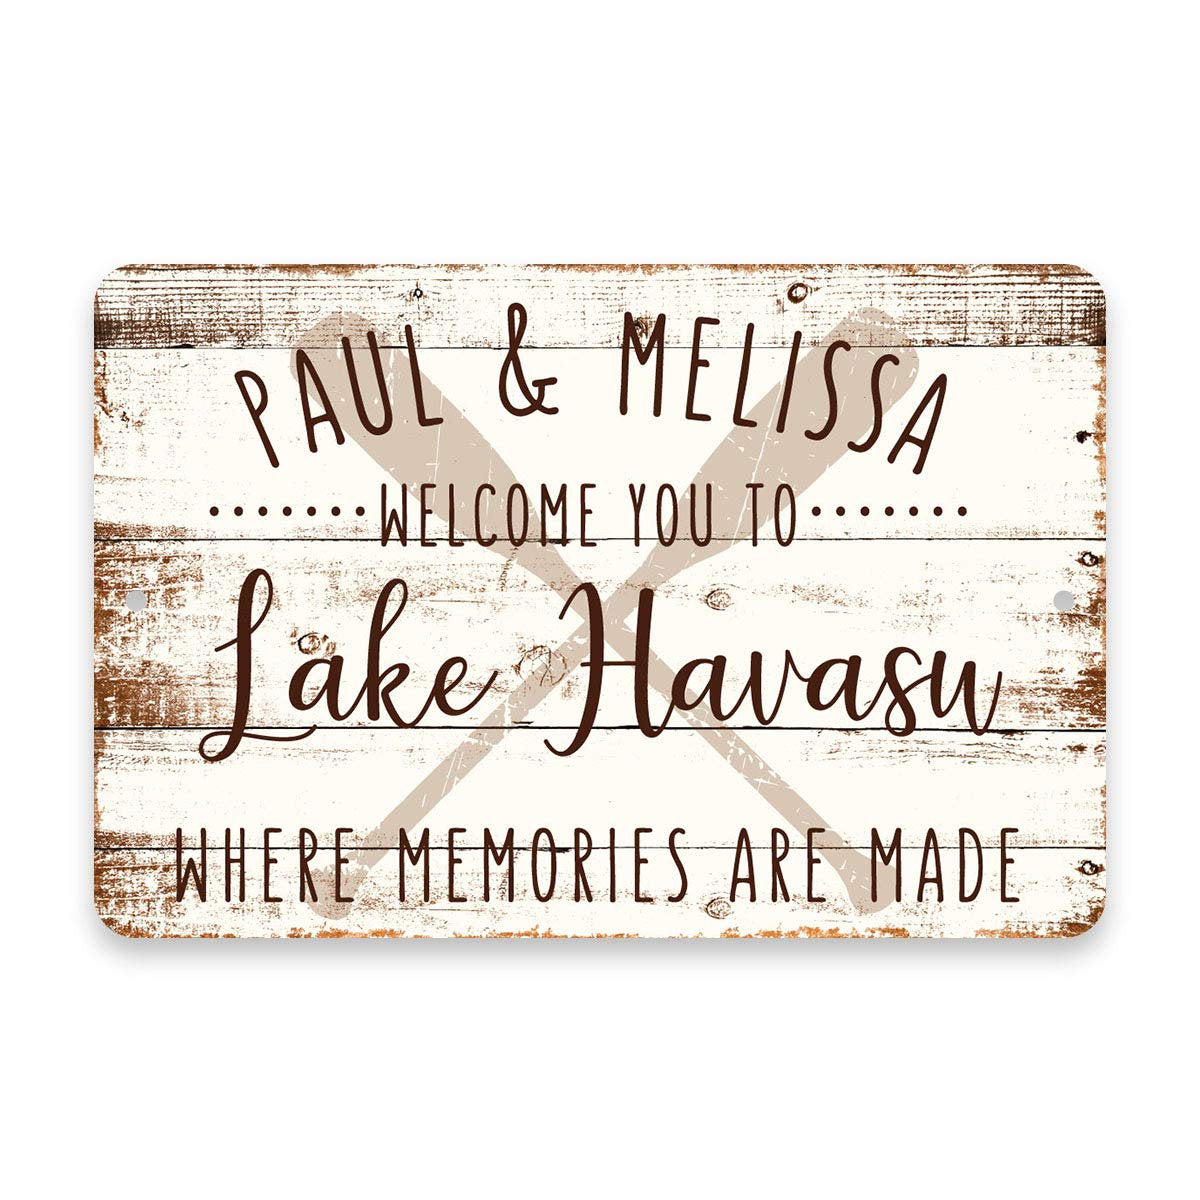 Personalized Welcome to Lake Havasu Where Memories are Made Sign - 8 X 12 Metal Sign with Wood Look